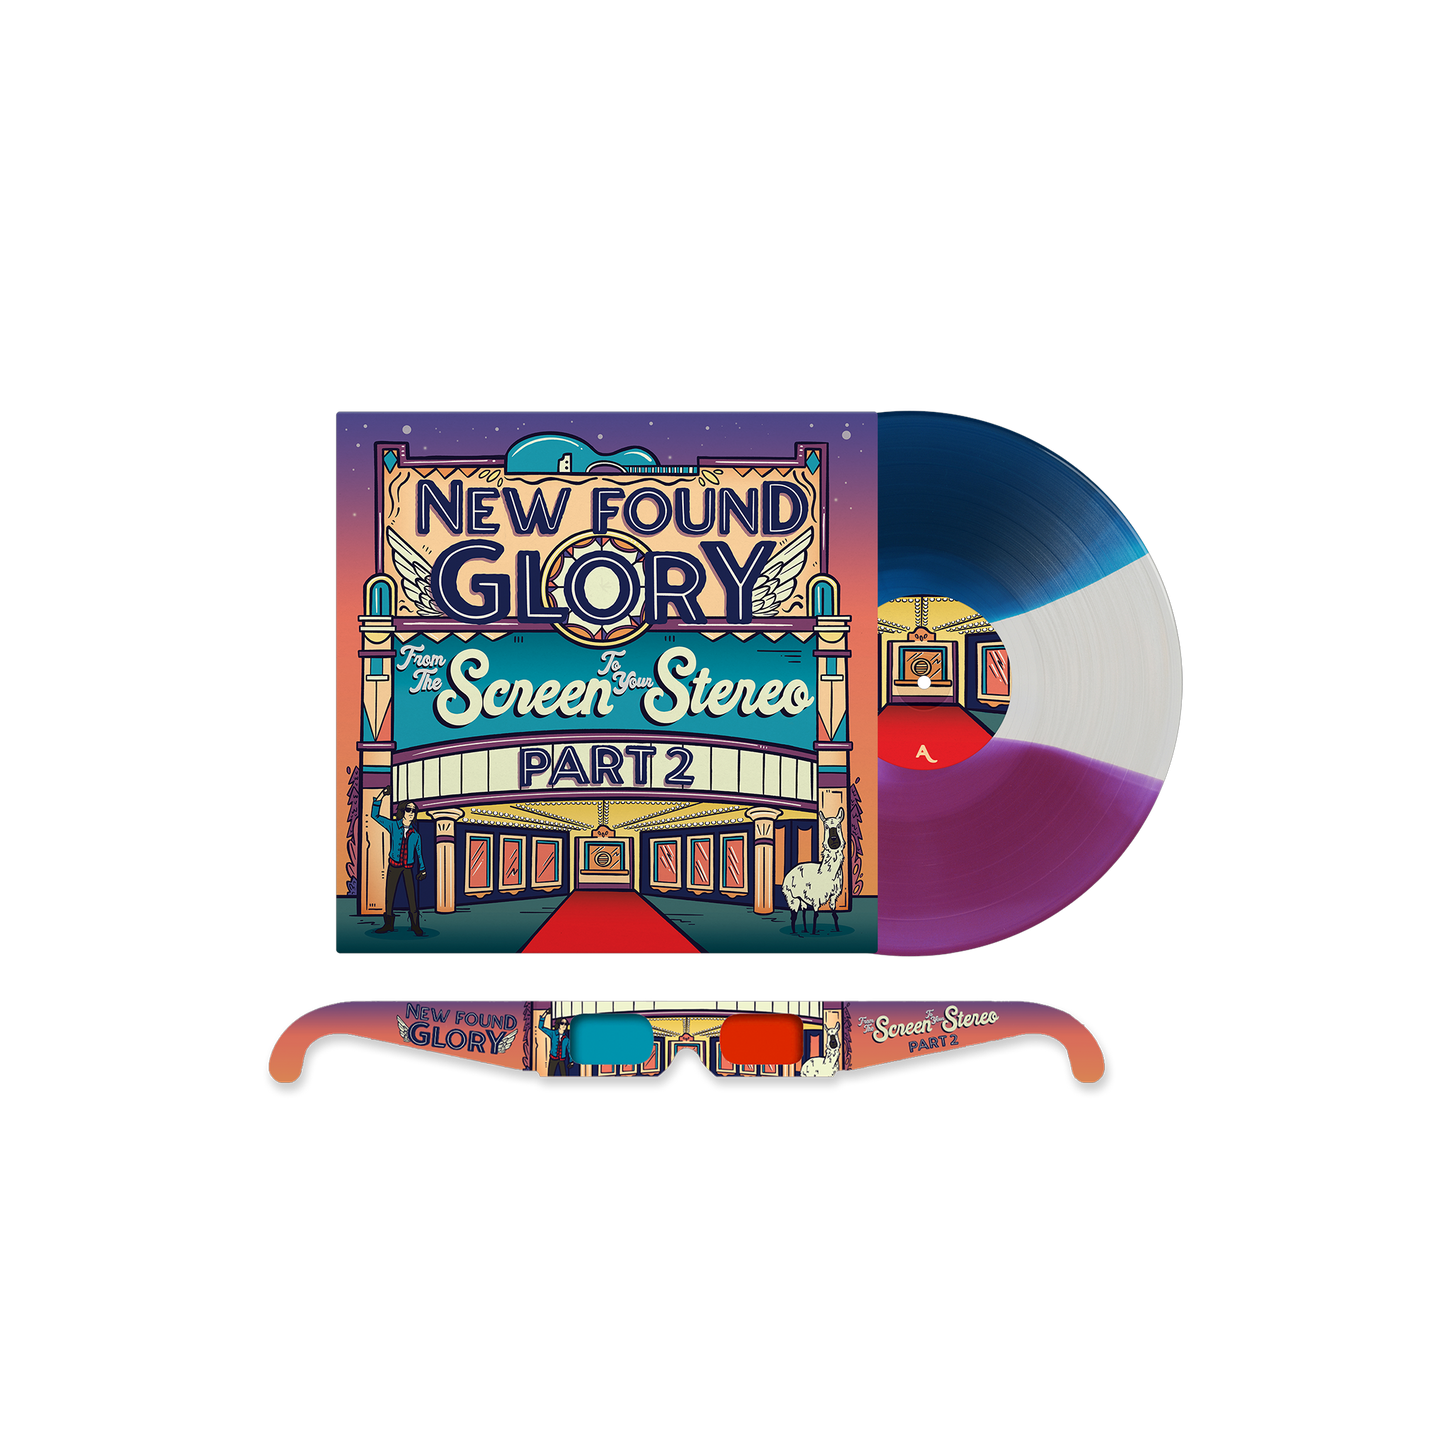 New Found Glory - From The Screen To Your Stereo Part 2 - Tri-Color Vinyl Bundle